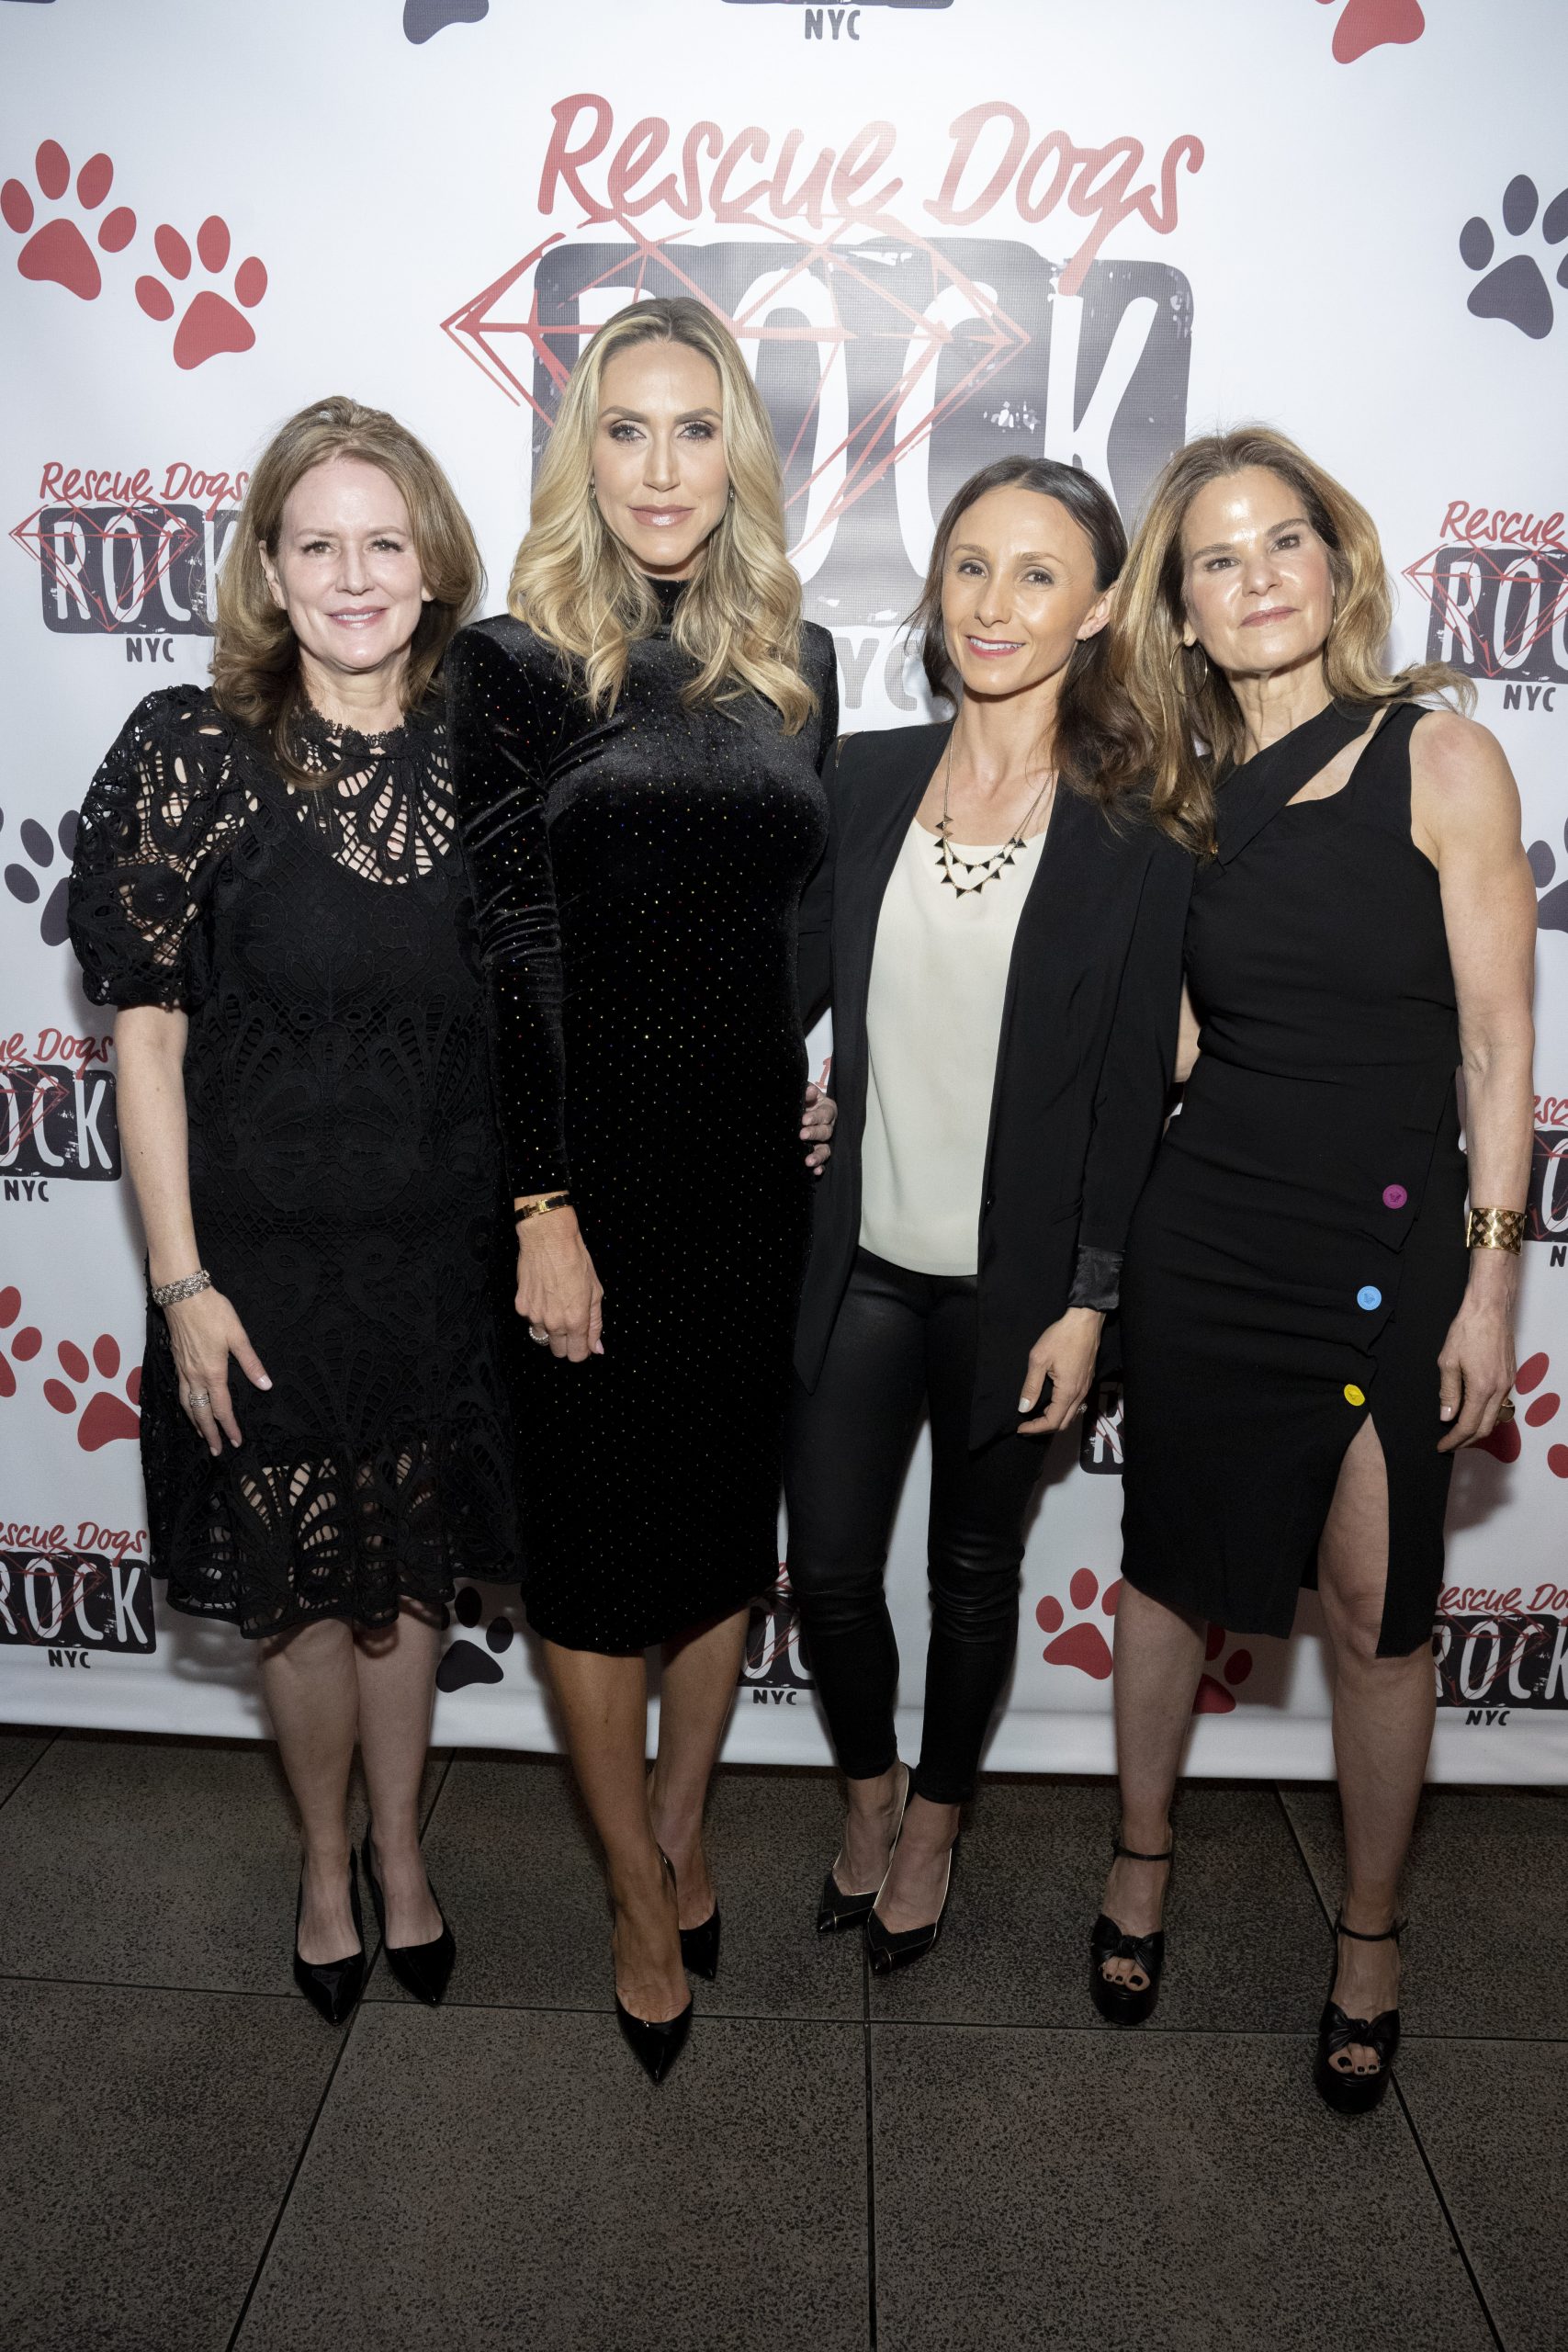 Rescue Dogs Rock NYC held their ‘Cocktails for Canines’ Annual Gala